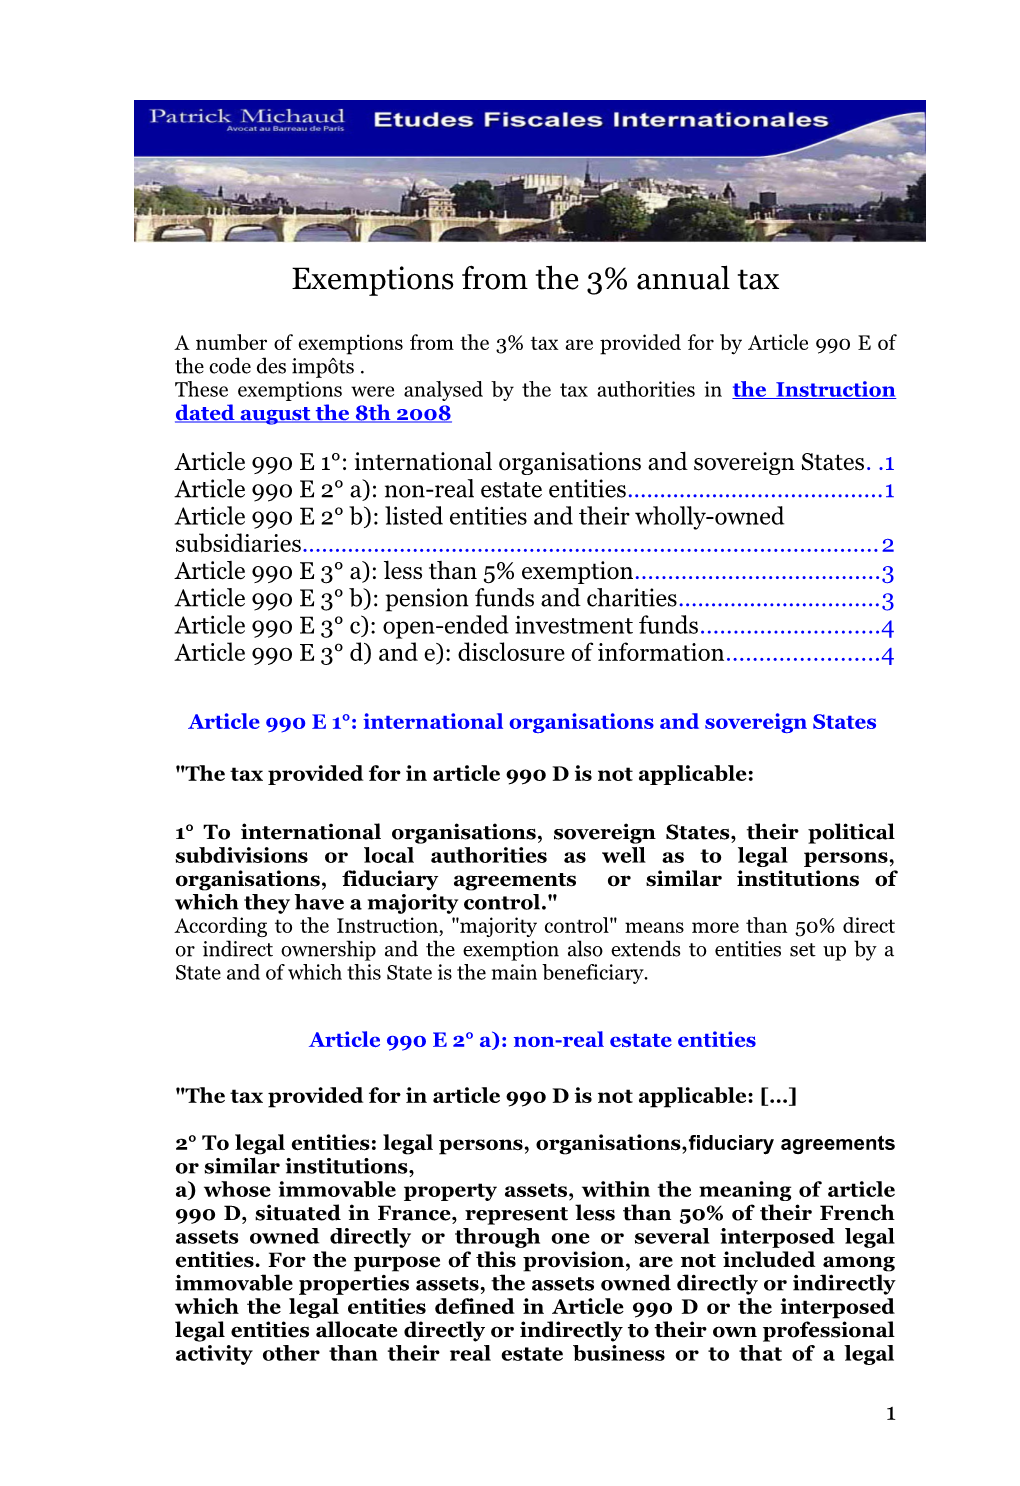 Exemptions from the 3% Annual Tax